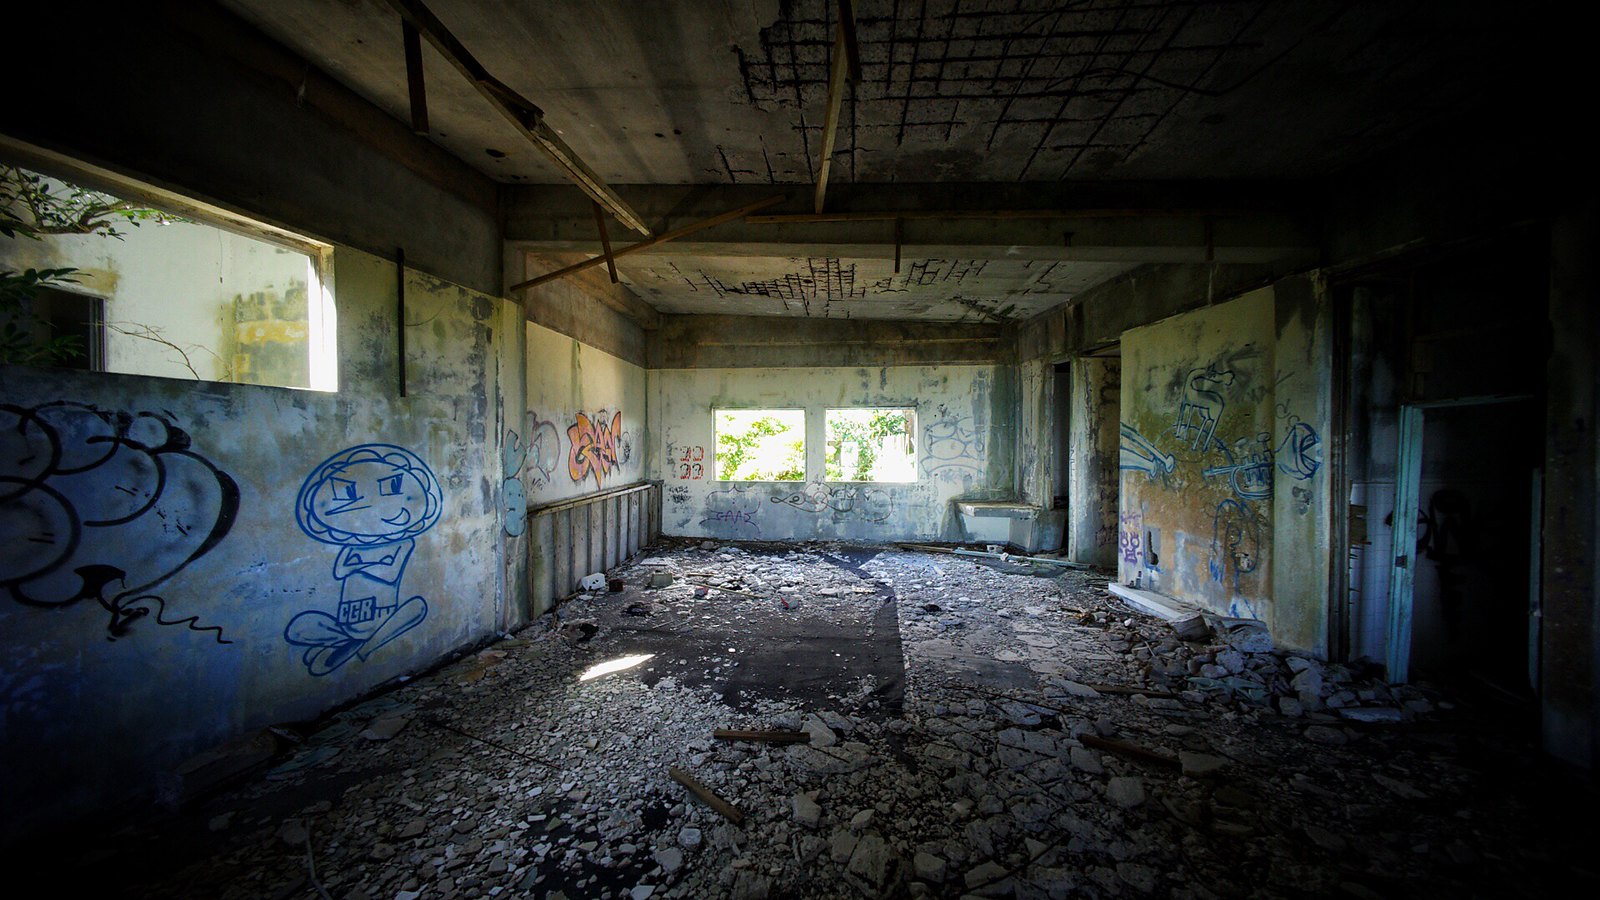 Some more Nakagusuku Hotel for you filthy urbex lovers.